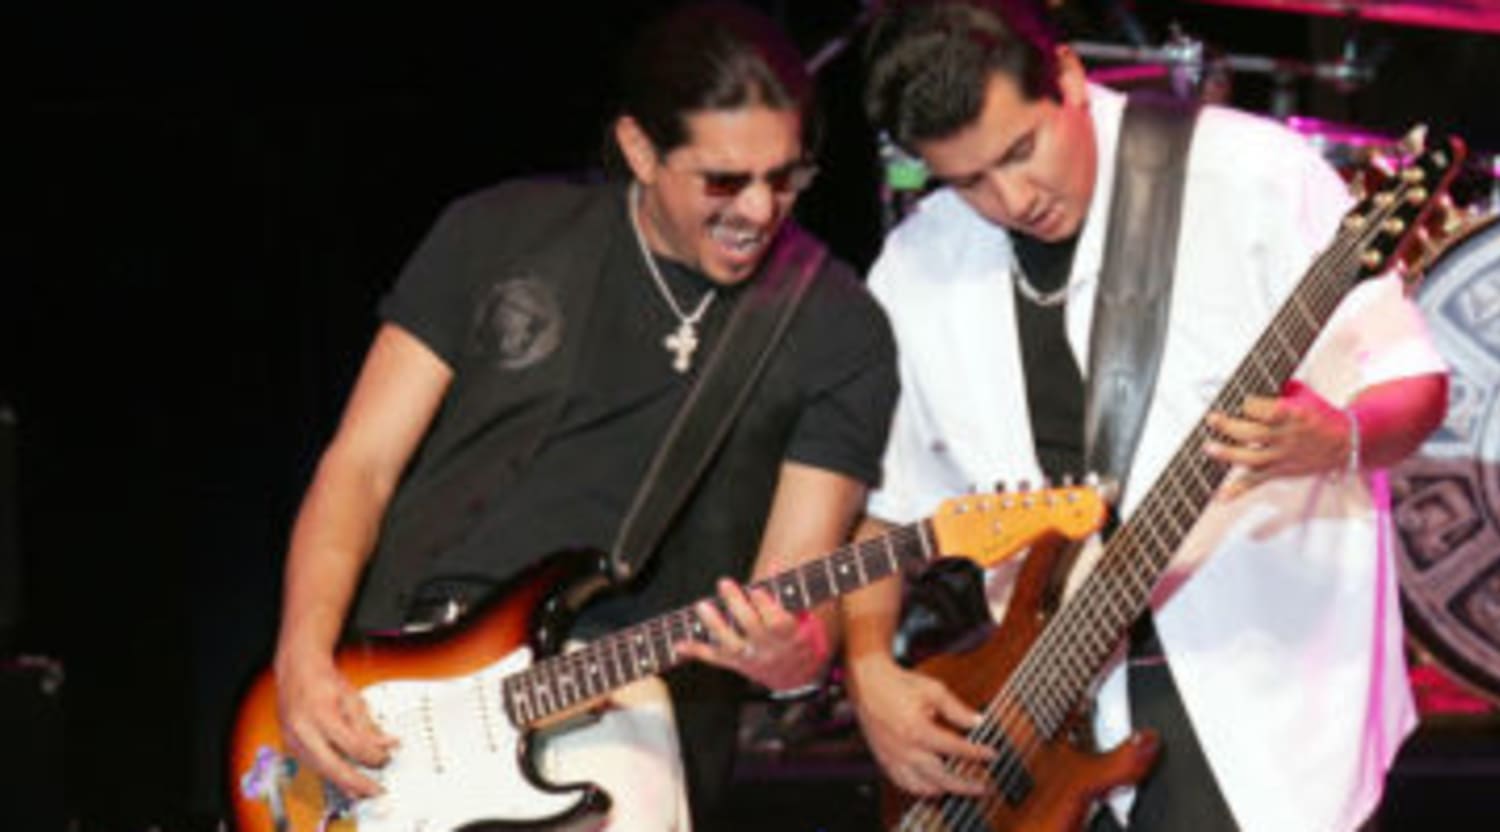 Los Lonely Boys Tickets Los Lonely Boys Tour Dates on StubHub!